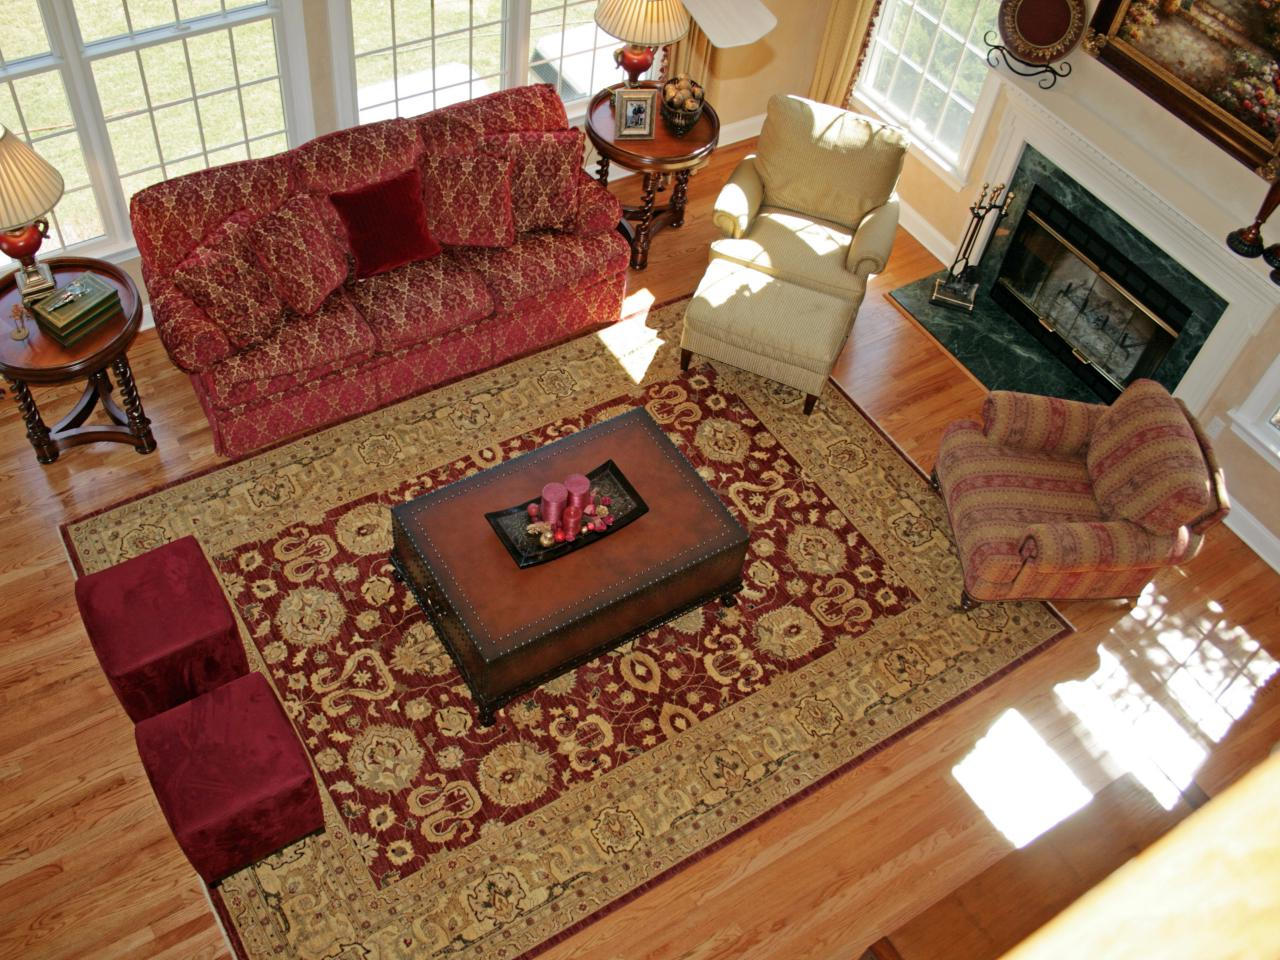 Big Plush Area Rugs For Living Room